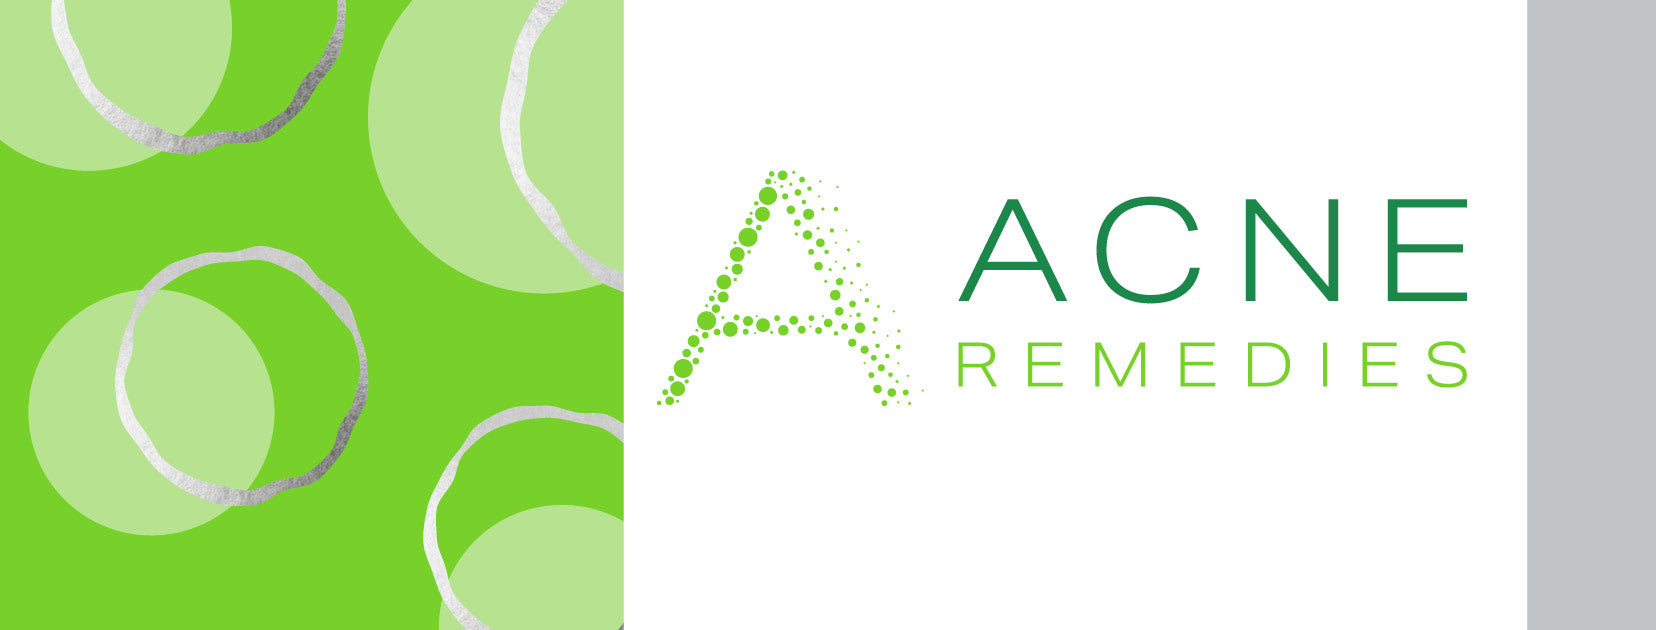 Acne Remedies - Systems/Collections